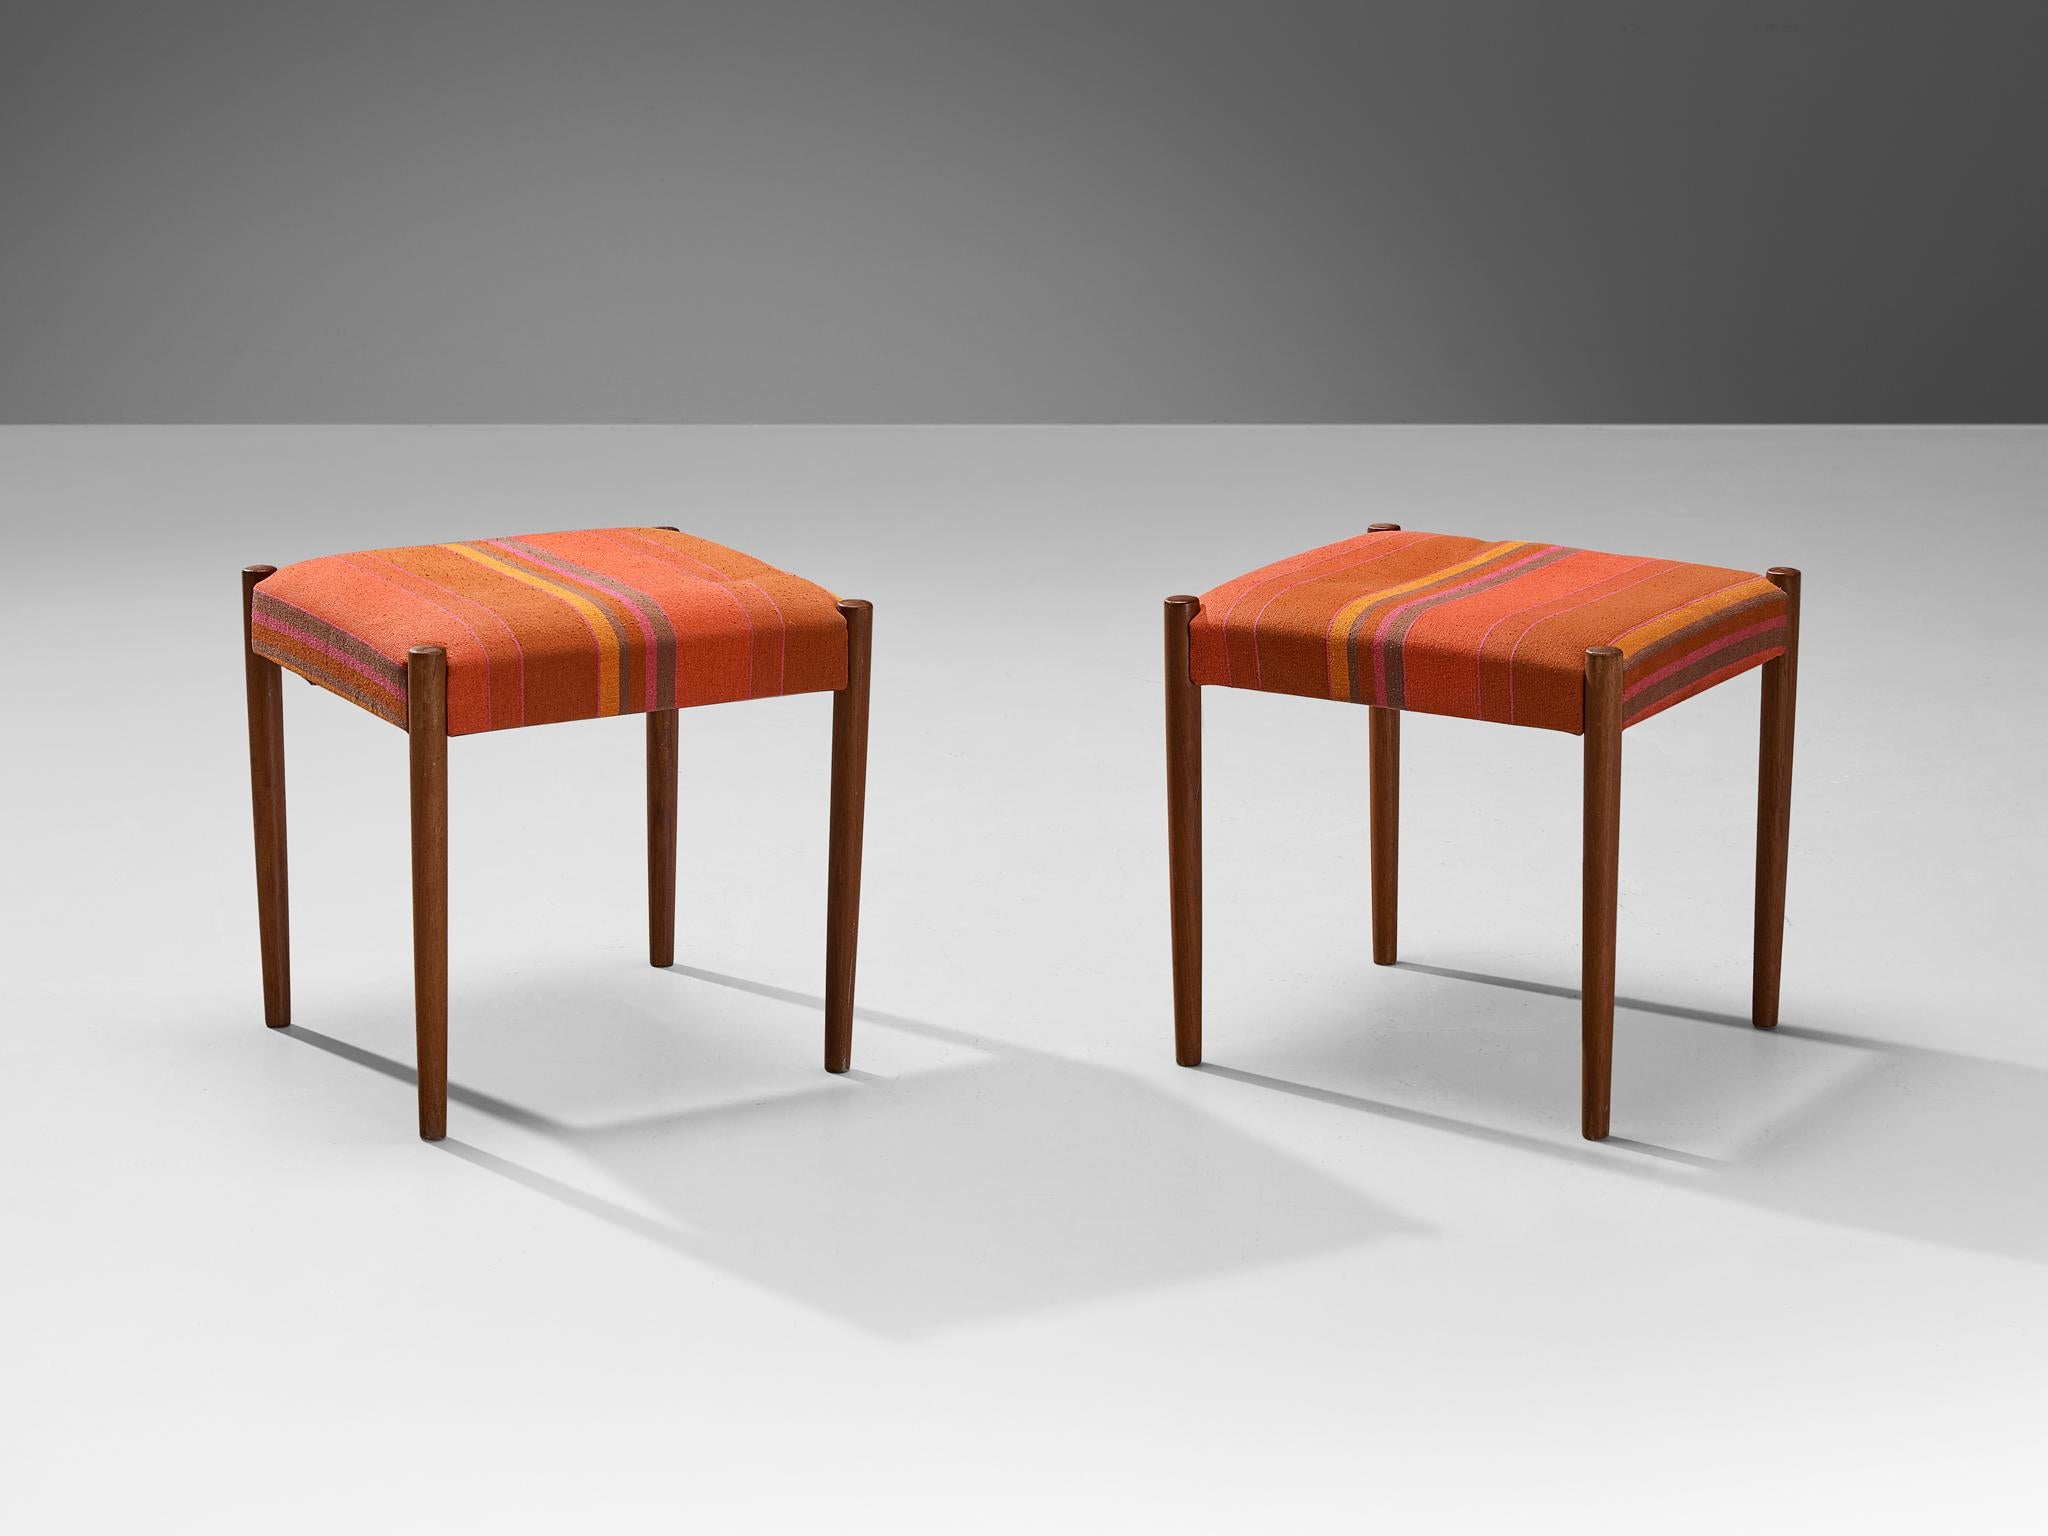 Pair of stools or ottomans, teak, fabric, Denmark, 1960s

Elegant in line and practical to use, these stools are exemplary for Mid-Century Scandinavian Design. The teak framework is comprised of four round legs that slightly narrow towards the